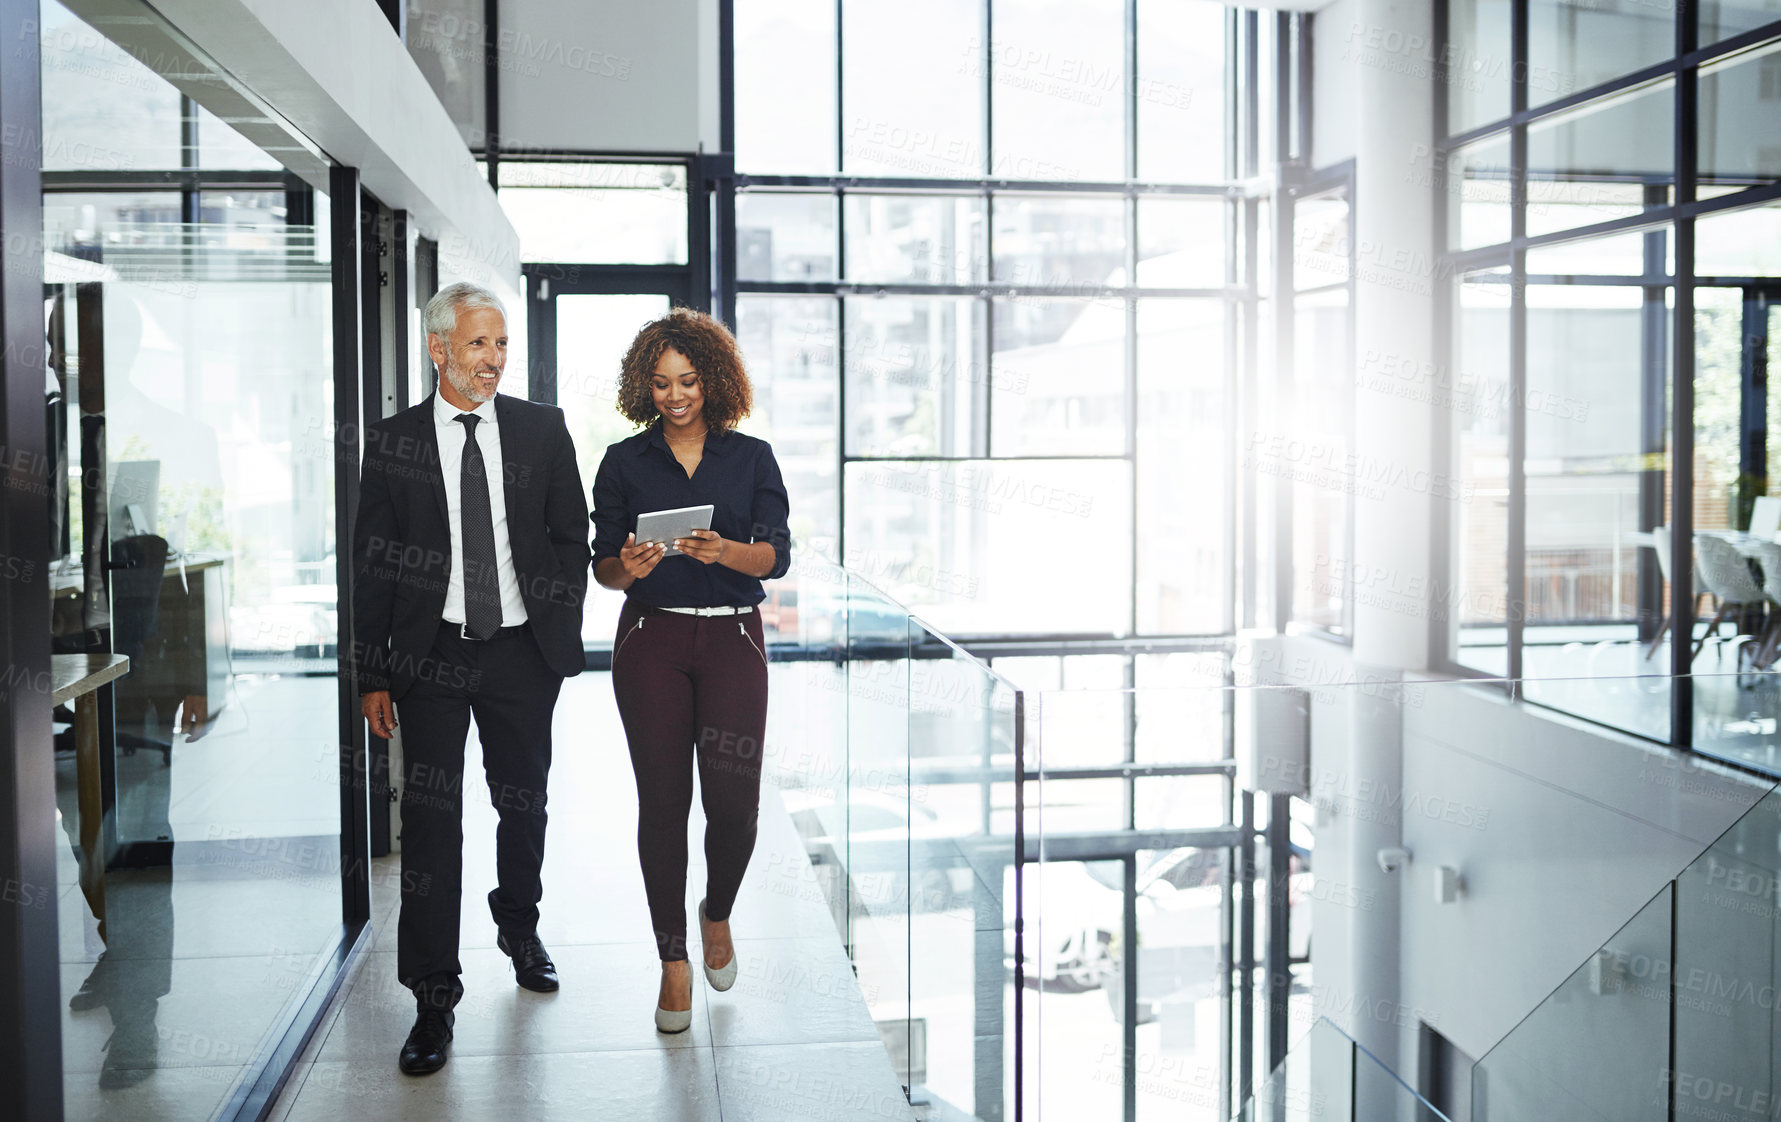 Buy stock photo Shot of two businesspeople having a discussion while walking together in an office